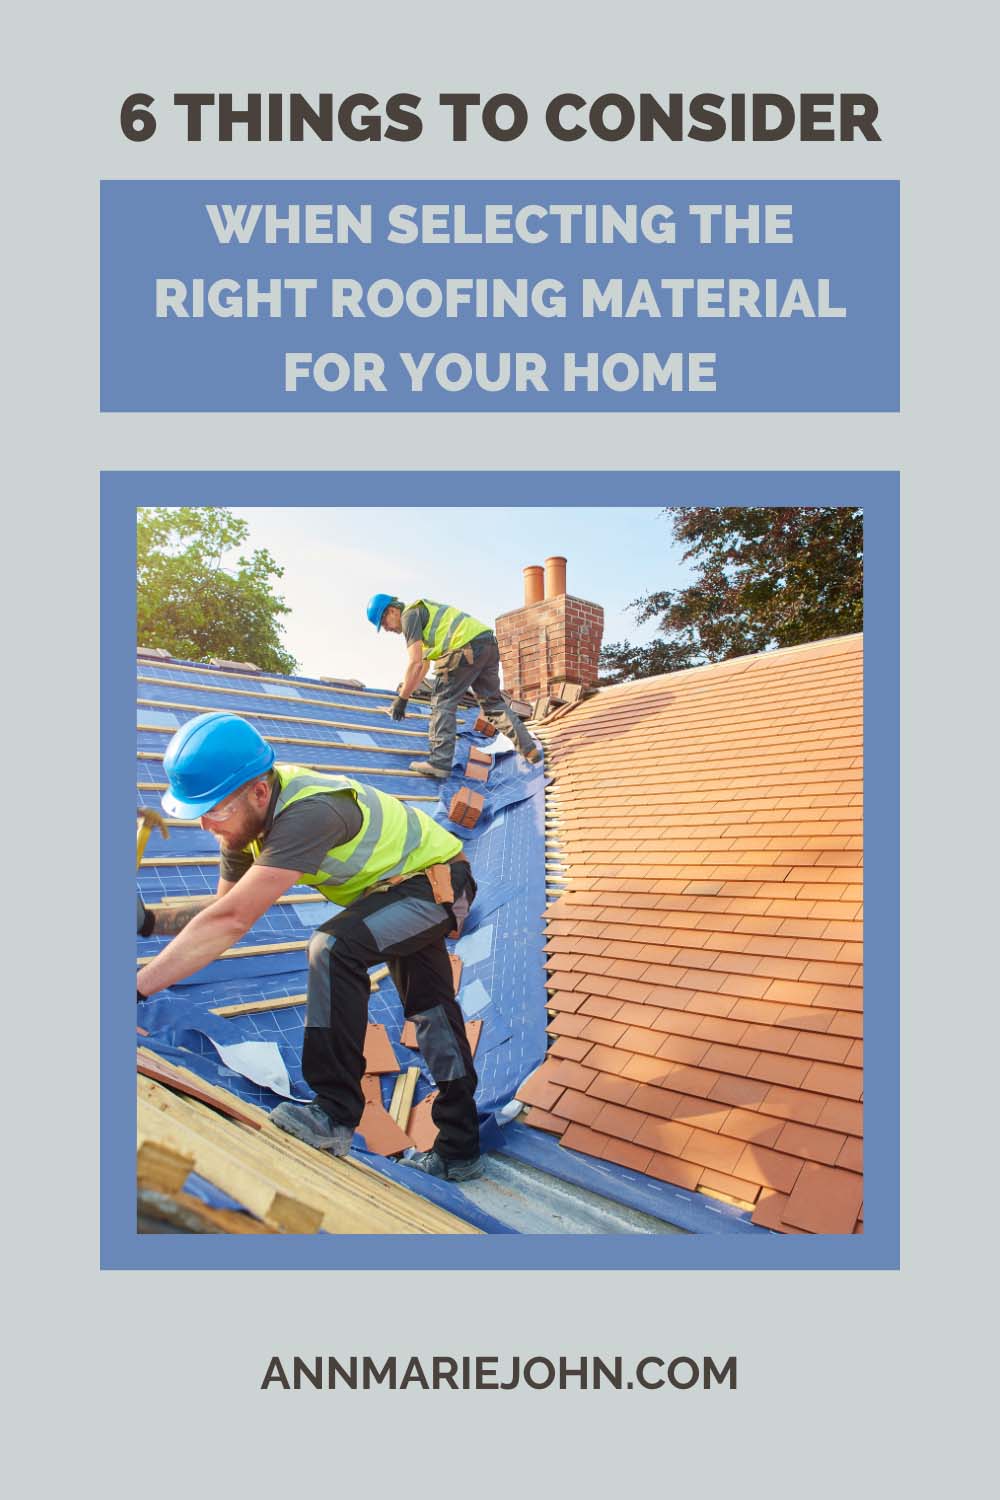 6 Things to Consider When Selecting the Right Roofing Material for Your Home